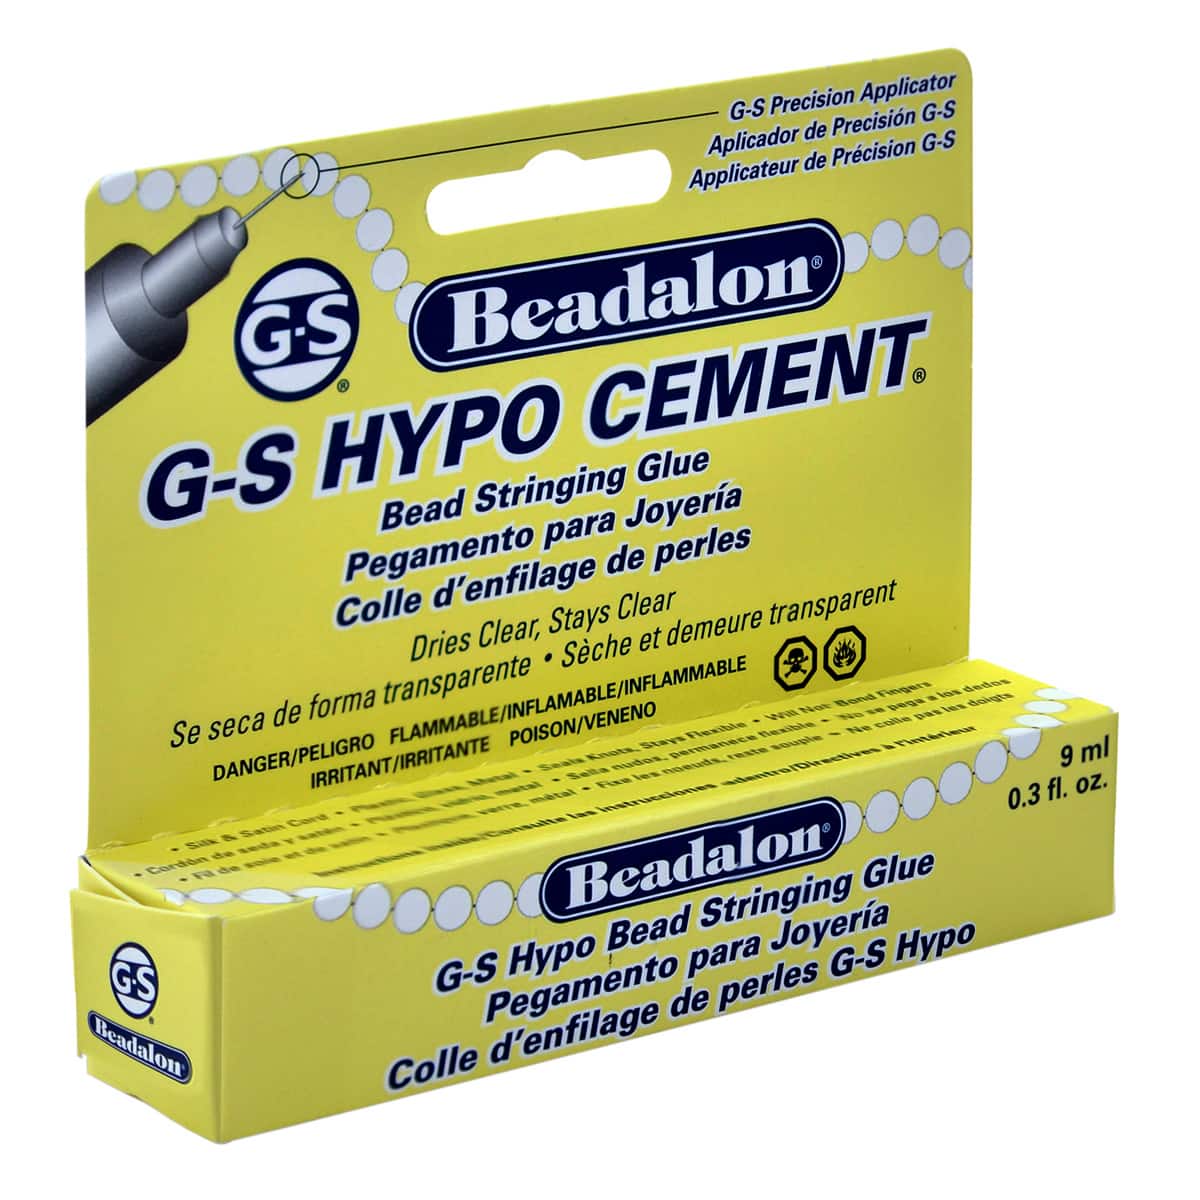 G-S Hypo Cement with Precision Applicator